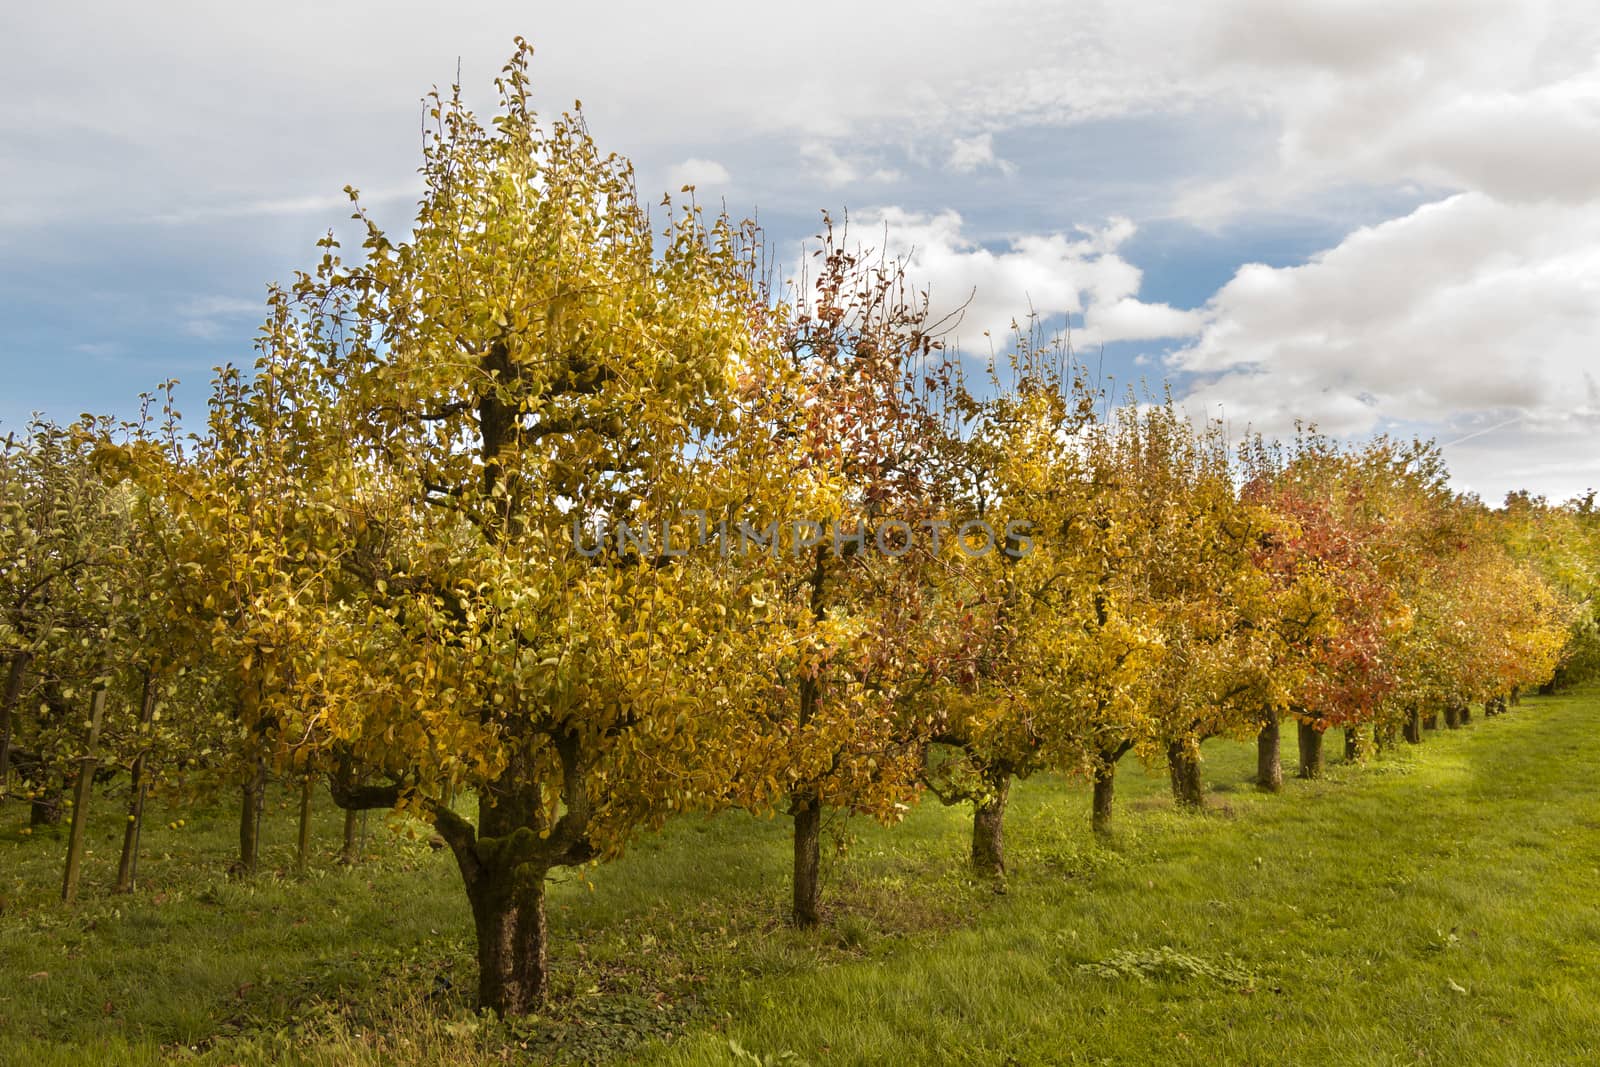 Orchard of fruit trees in a row